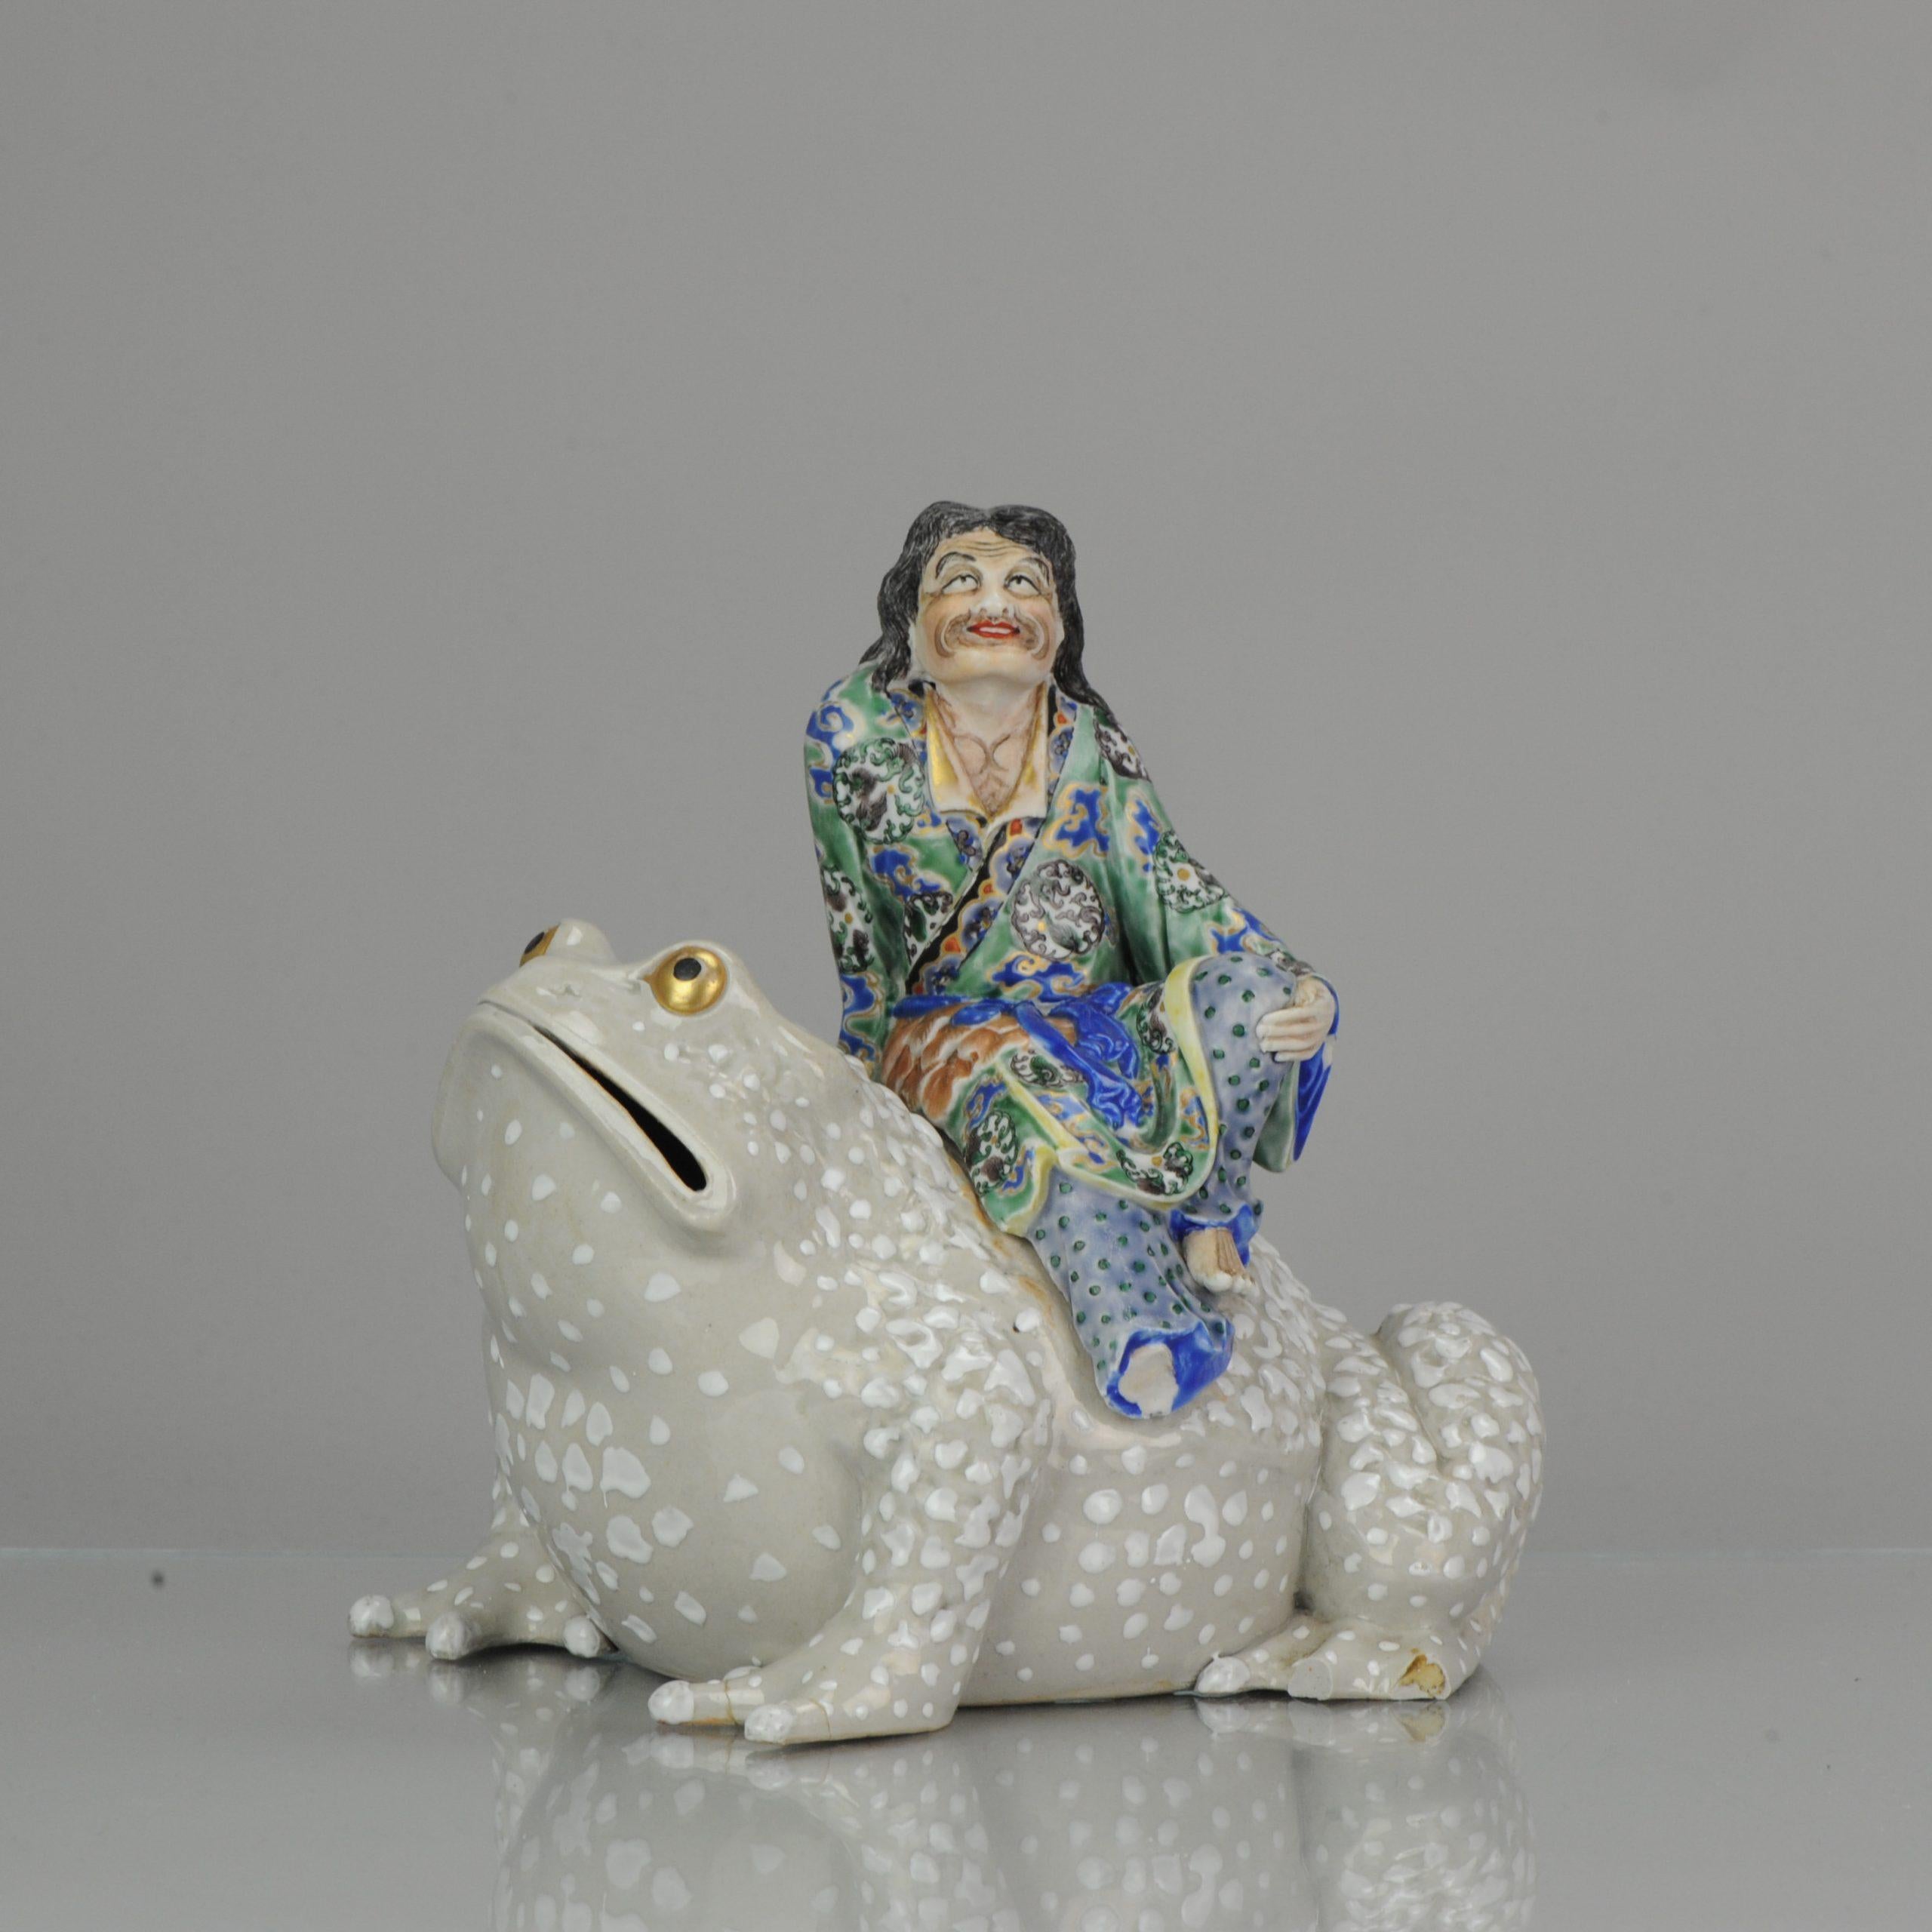 Large, lovely and very nicely handcrafted.
An unusual large enameled Koro of Liu Hai seated atop a massive three-legged toad with raised lumps on its skin. The immortal dressed in robes tied at the waist and left open exposing his chest. He has an